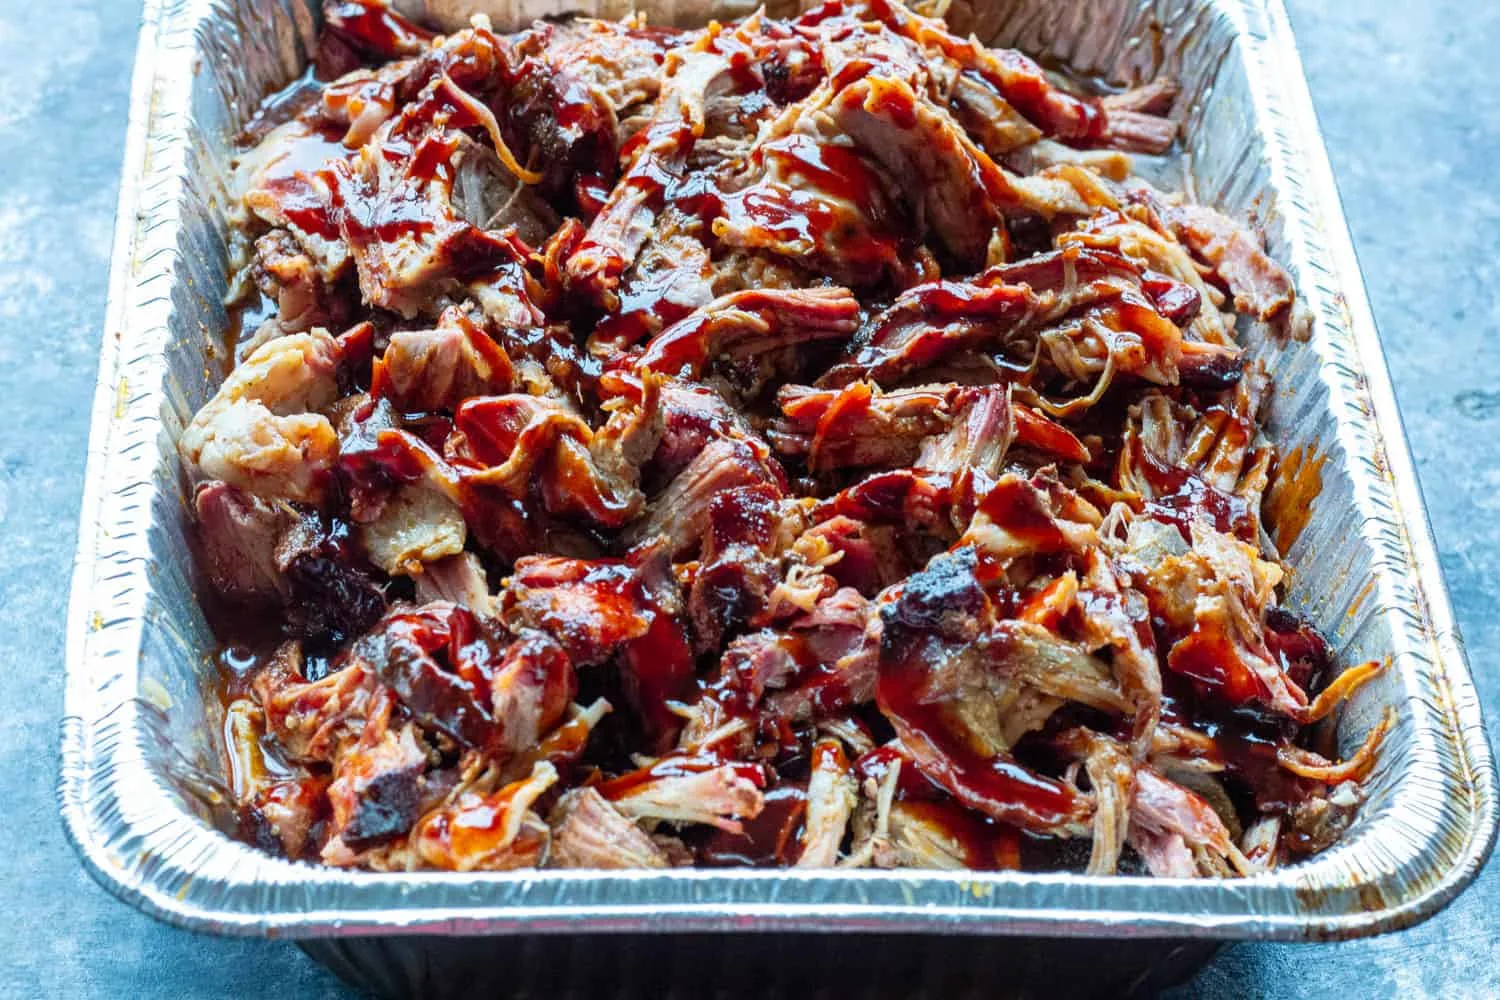 Pulled pork in a pan ready to be served